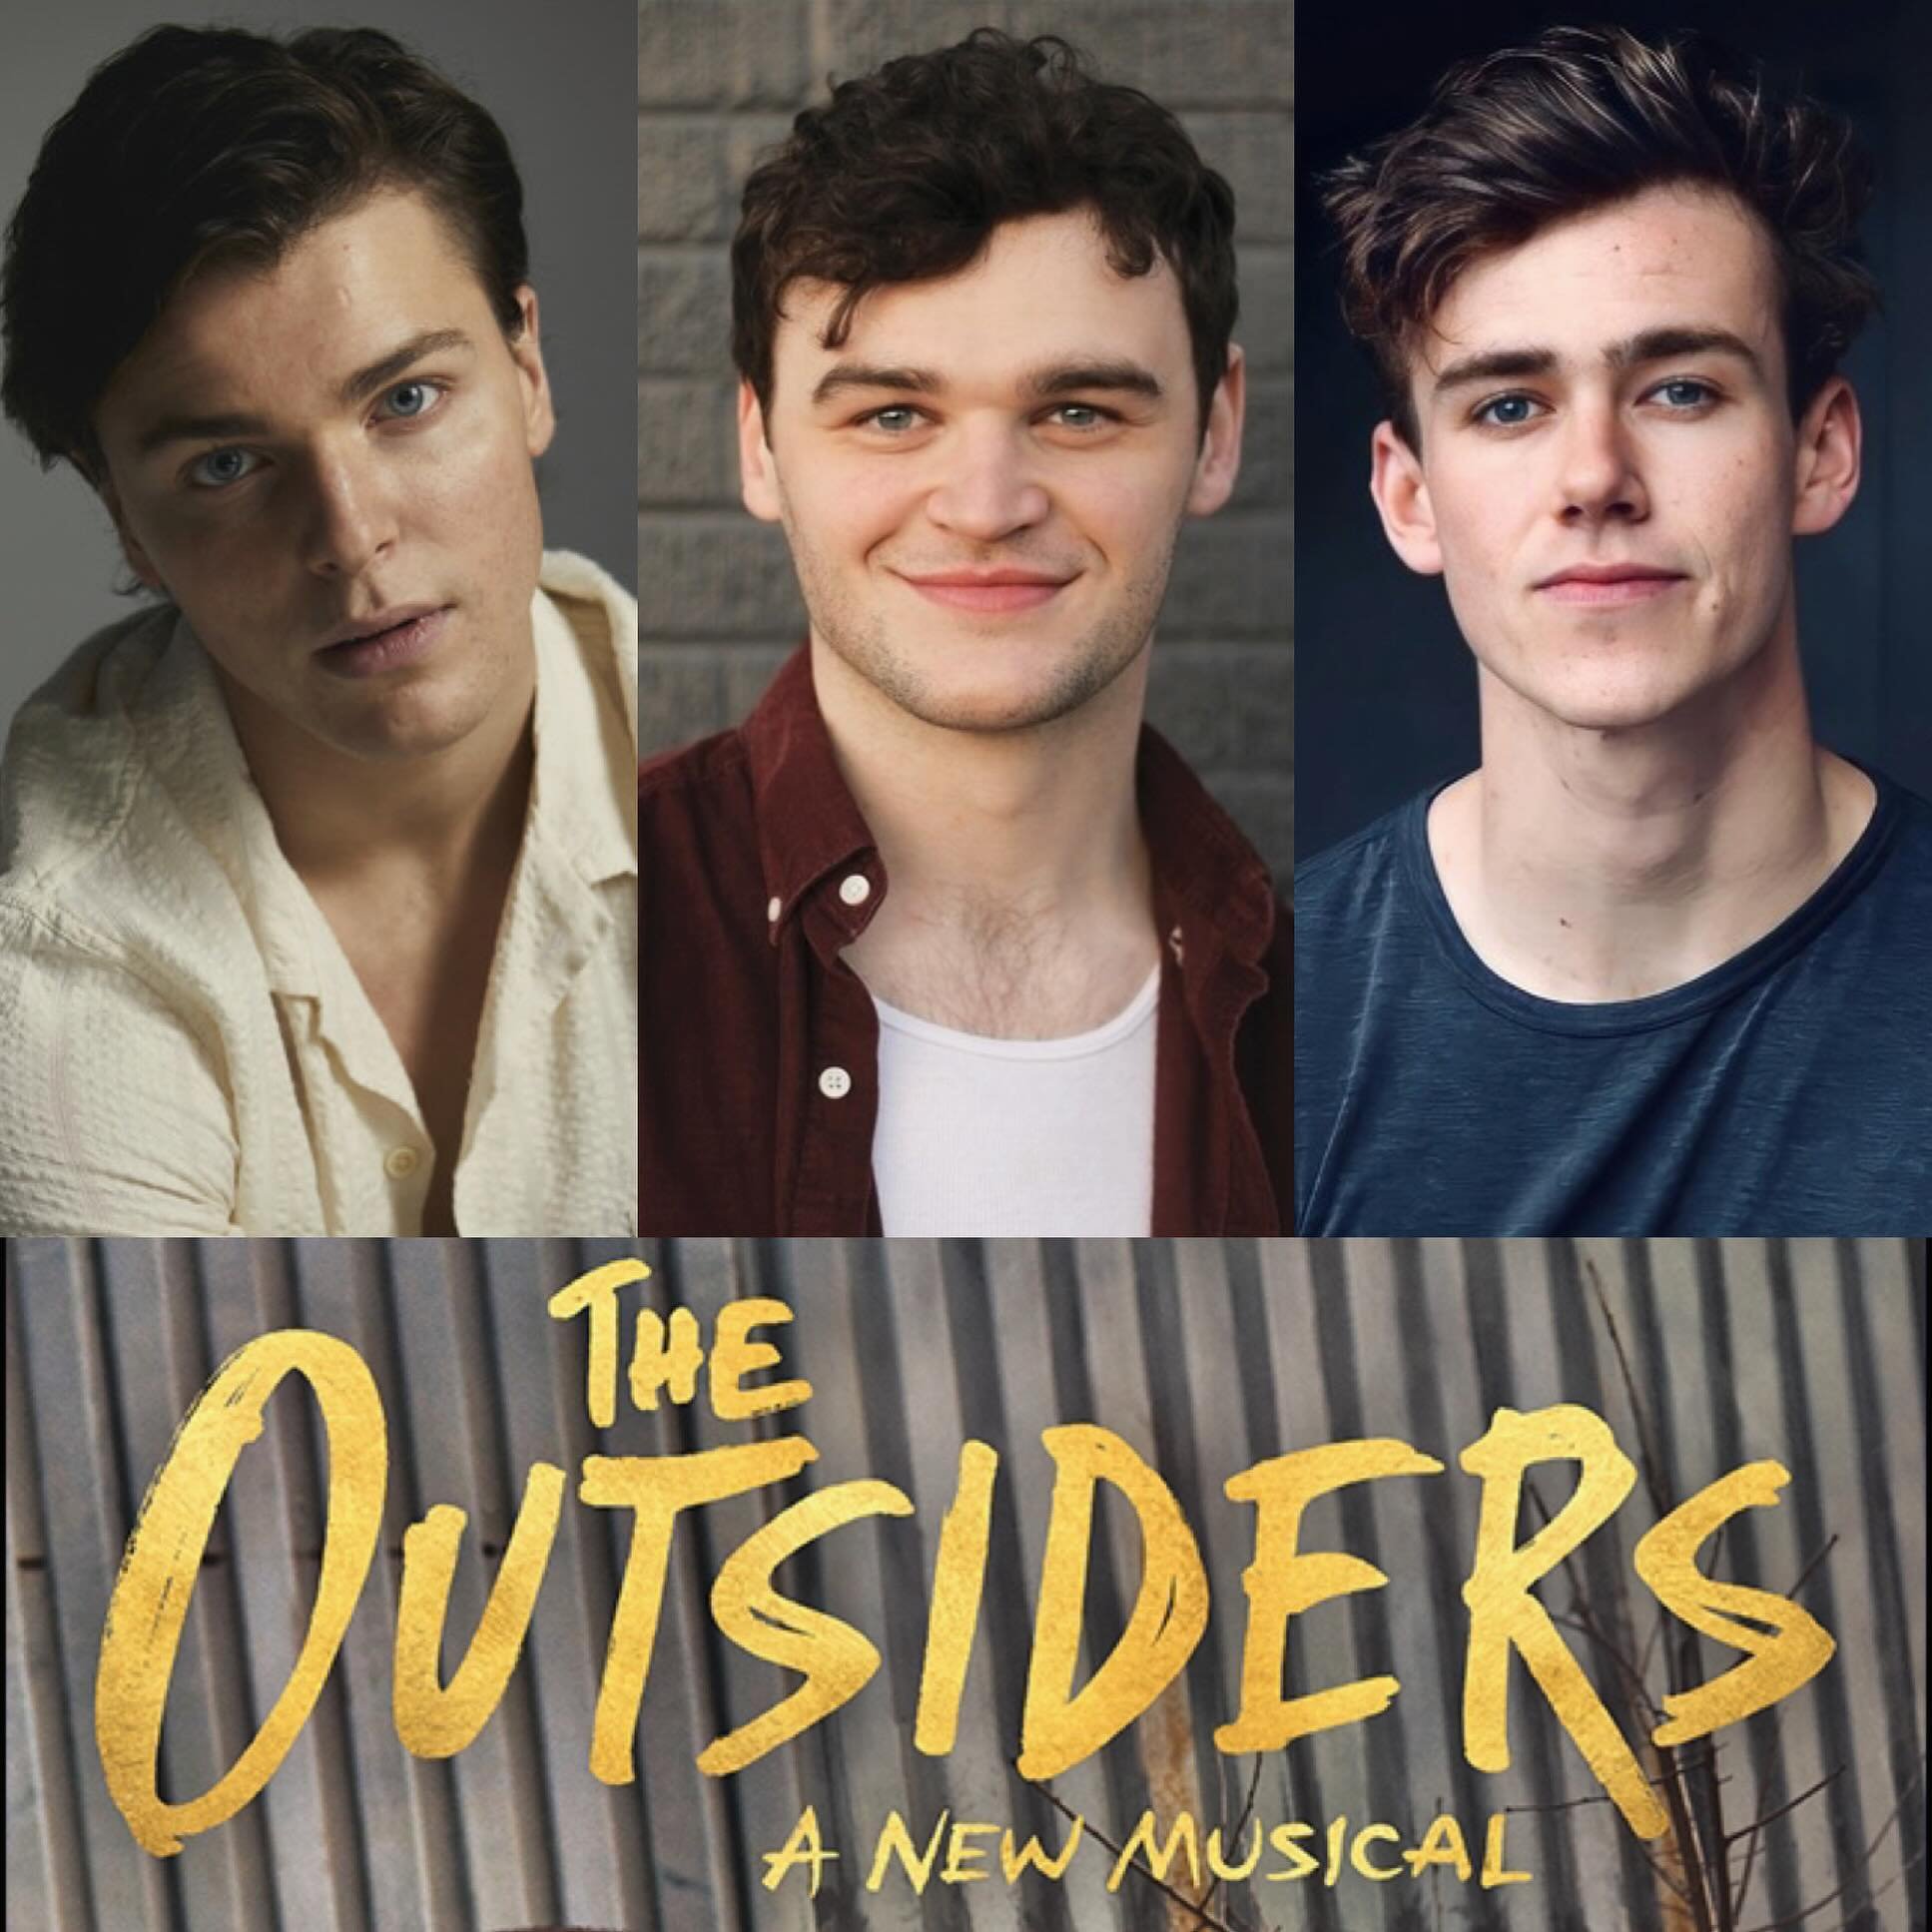 Wishing a Happy Opening Night and Broadway Debuts to @jason.s.schmidt, @danberry.j, &amp; @rj_higton in @outsidersmusical on Broadway! ⭐️